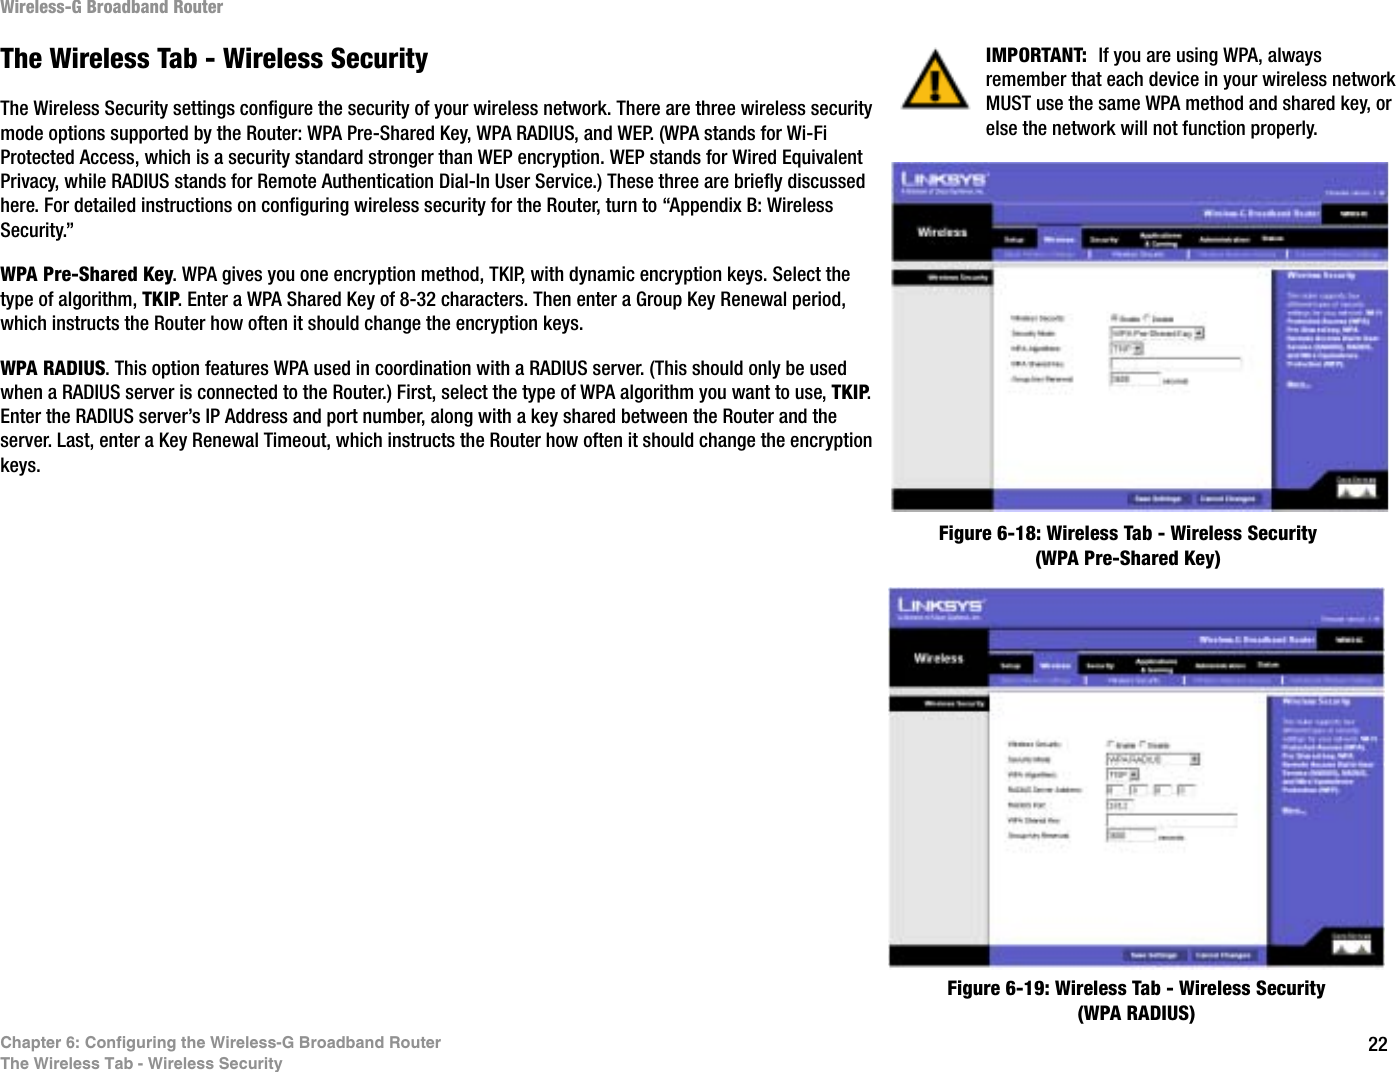 22Chapter 6: Configuring the Wireless-G Broadband RouterThe Wireless Tab - Wireless SecurityWireless-G Broadband RouterThe Wireless Tab - Wireless SecurityThe Wireless Security settings configure the security of your wireless network. There are three wireless security mode options supported by the Router: WPA Pre-Shared Key, WPA RADIUS, and WEP. (WPA stands for Wi-Fi Protected Access, which is a security standard stronger than WEP encryption. WEP stands for Wired Equivalent Privacy, while RADIUS stands for Remote Authentication Dial-In User Service.) These three are briefly discussed here. For detailed instructions on configuring wireless security for the Router, turn to “Appendix B: Wireless Security.”WPA Pre-Shared Key. WPA gives you one encryption method, TKIP, with dynamic encryption keys. Select the type of algorithm, TKIP. Enter a WPA Shared Key of 8-32 characters. Then enter a Group Key Renewal period, which instructs the Router how often it should change the encryption keys.WPA RADIUS. This option features WPA used in coordination with a RADIUS server. (This should only be used when a RADIUS server is connected to the Router.) First, select the type of WPA algorithm you want to use, TKIP.Enter the RADIUS server’s IP Address and port number, along with a key shared between the Router and the server. Last, enter a Key Renewal Timeout, which instructs the Router how often it should change the encryption keys.Figure 6-18: Wireless Tab - Wireless Security (WPA Pre-Shared Key)Figure 6-19: Wireless Tab - Wireless Security (WPA RADIUS)IMPORTANT:  If you are using WPA, always remember that each device in your wireless network MUST use the same WPA method and shared key, or else the network will not function properly.